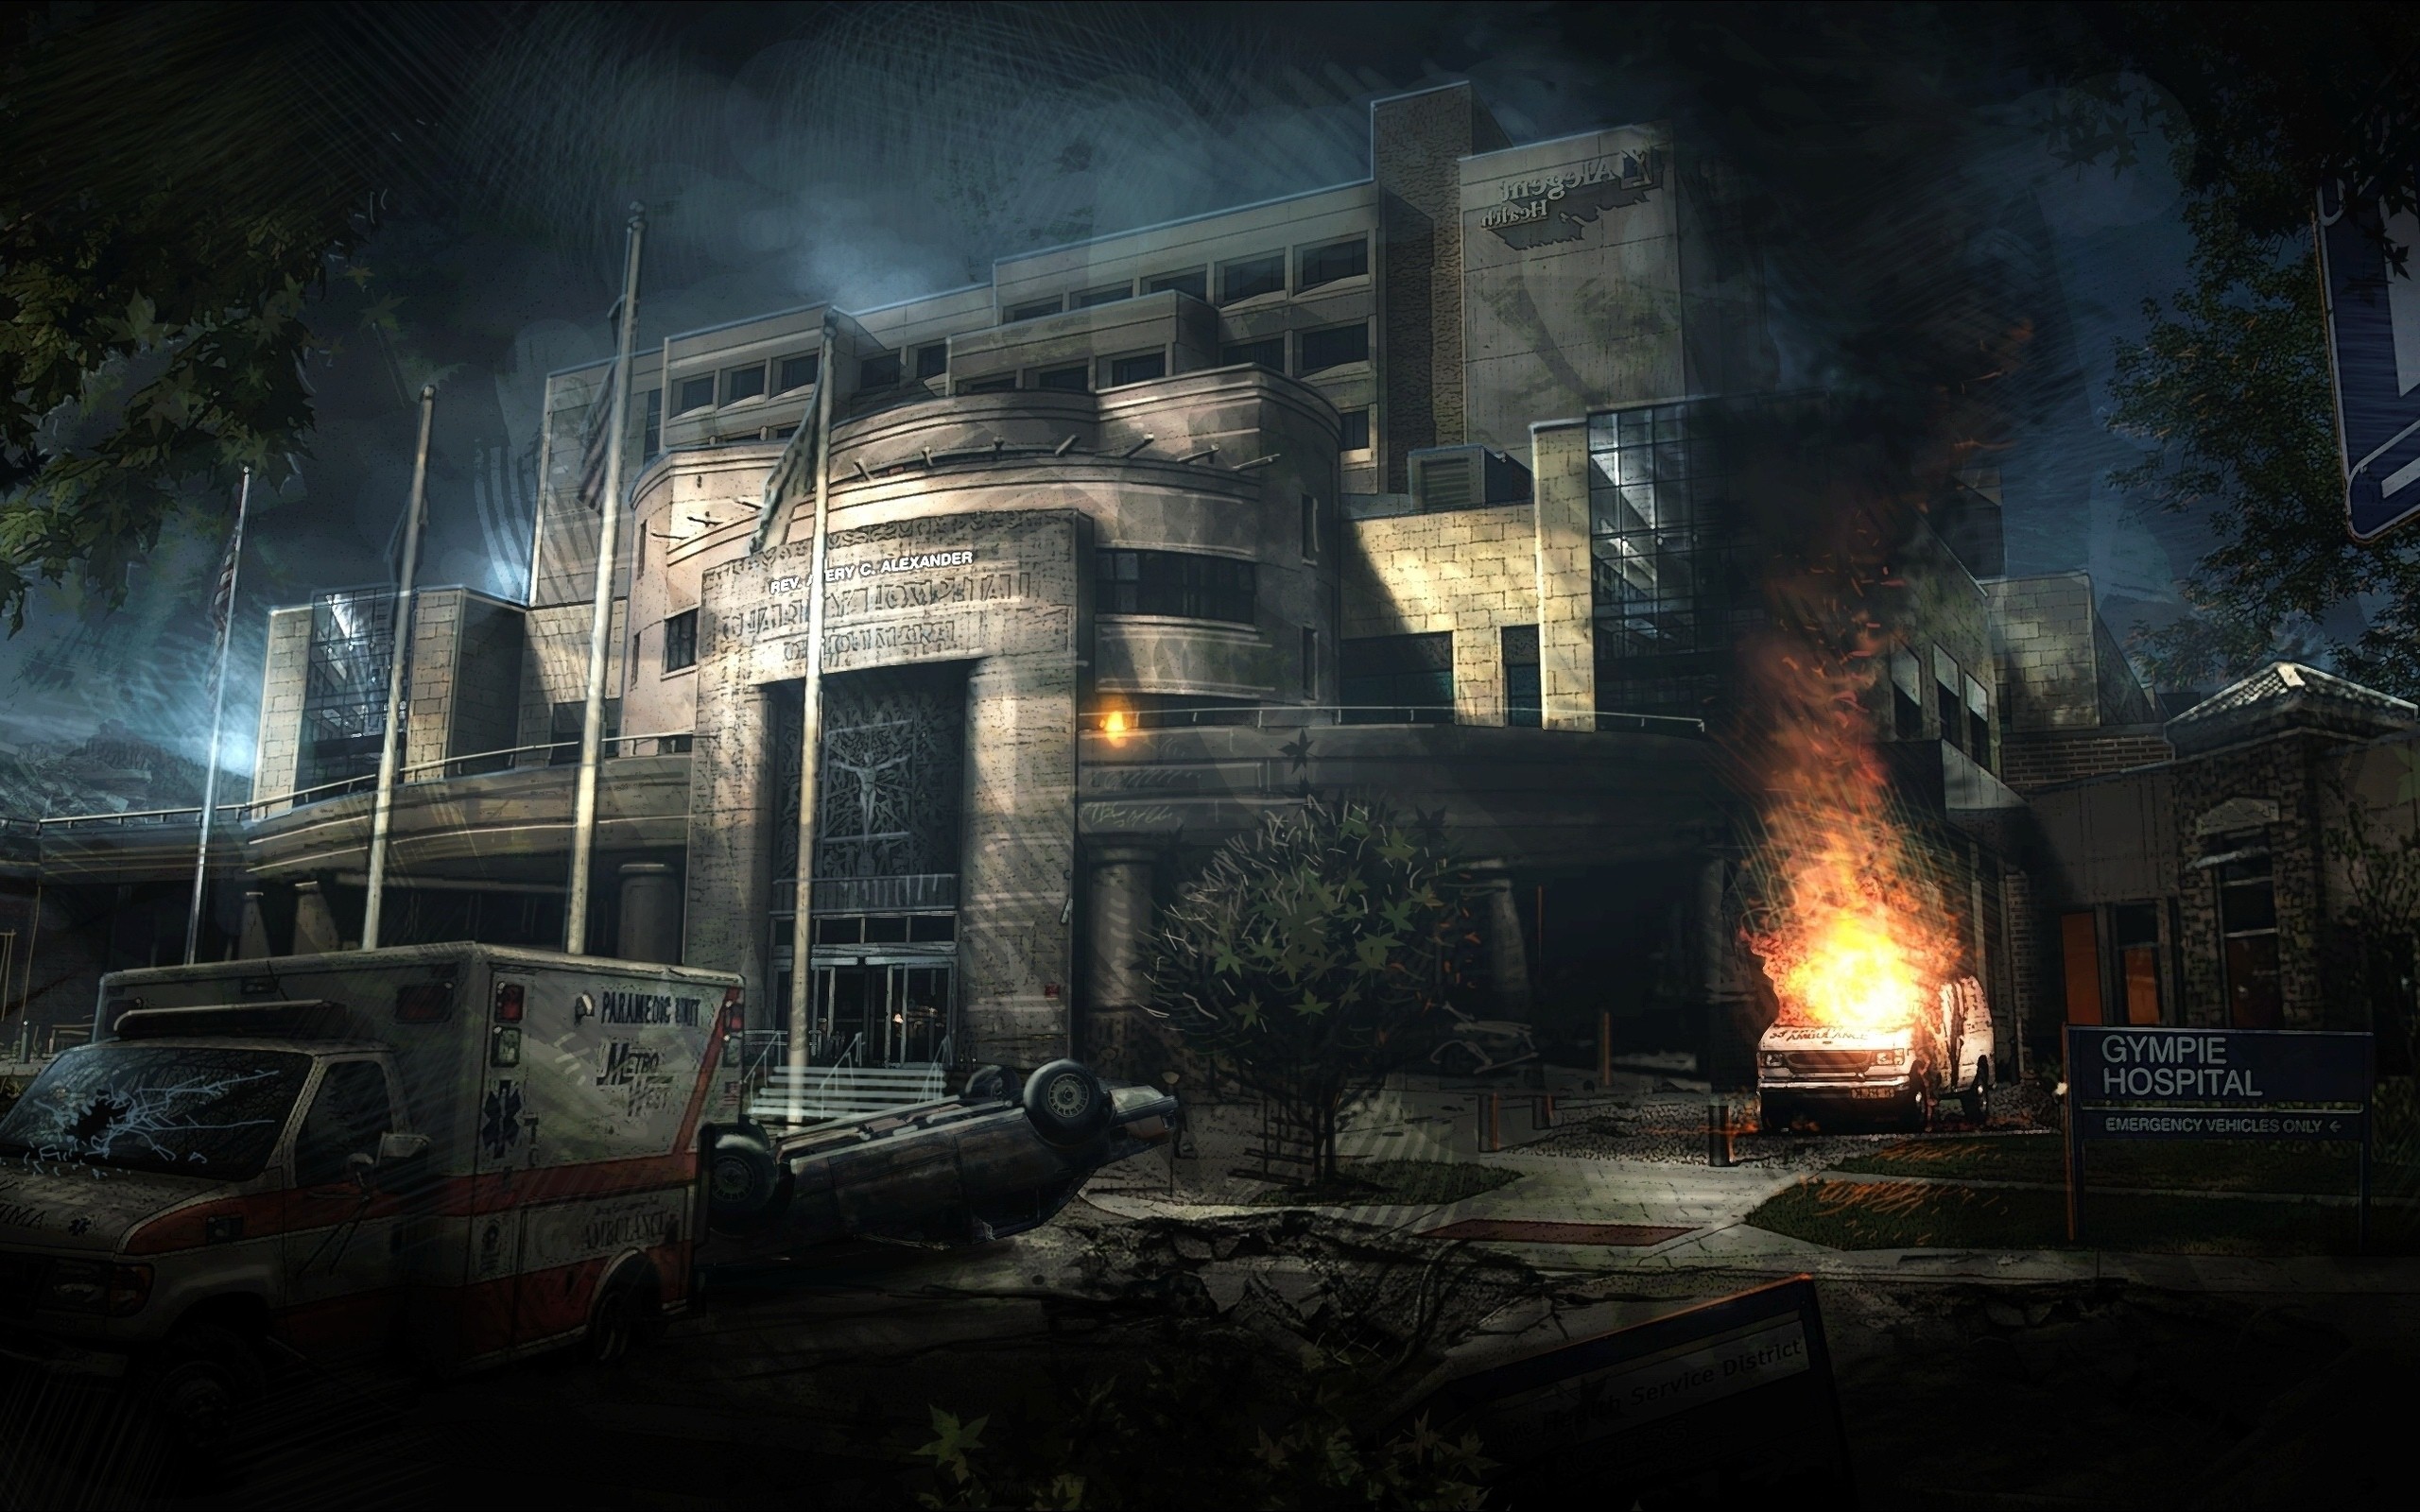 General 2560x1600 fire hospital ambulances concept art apocalyptic abandoned Abandoned city video games